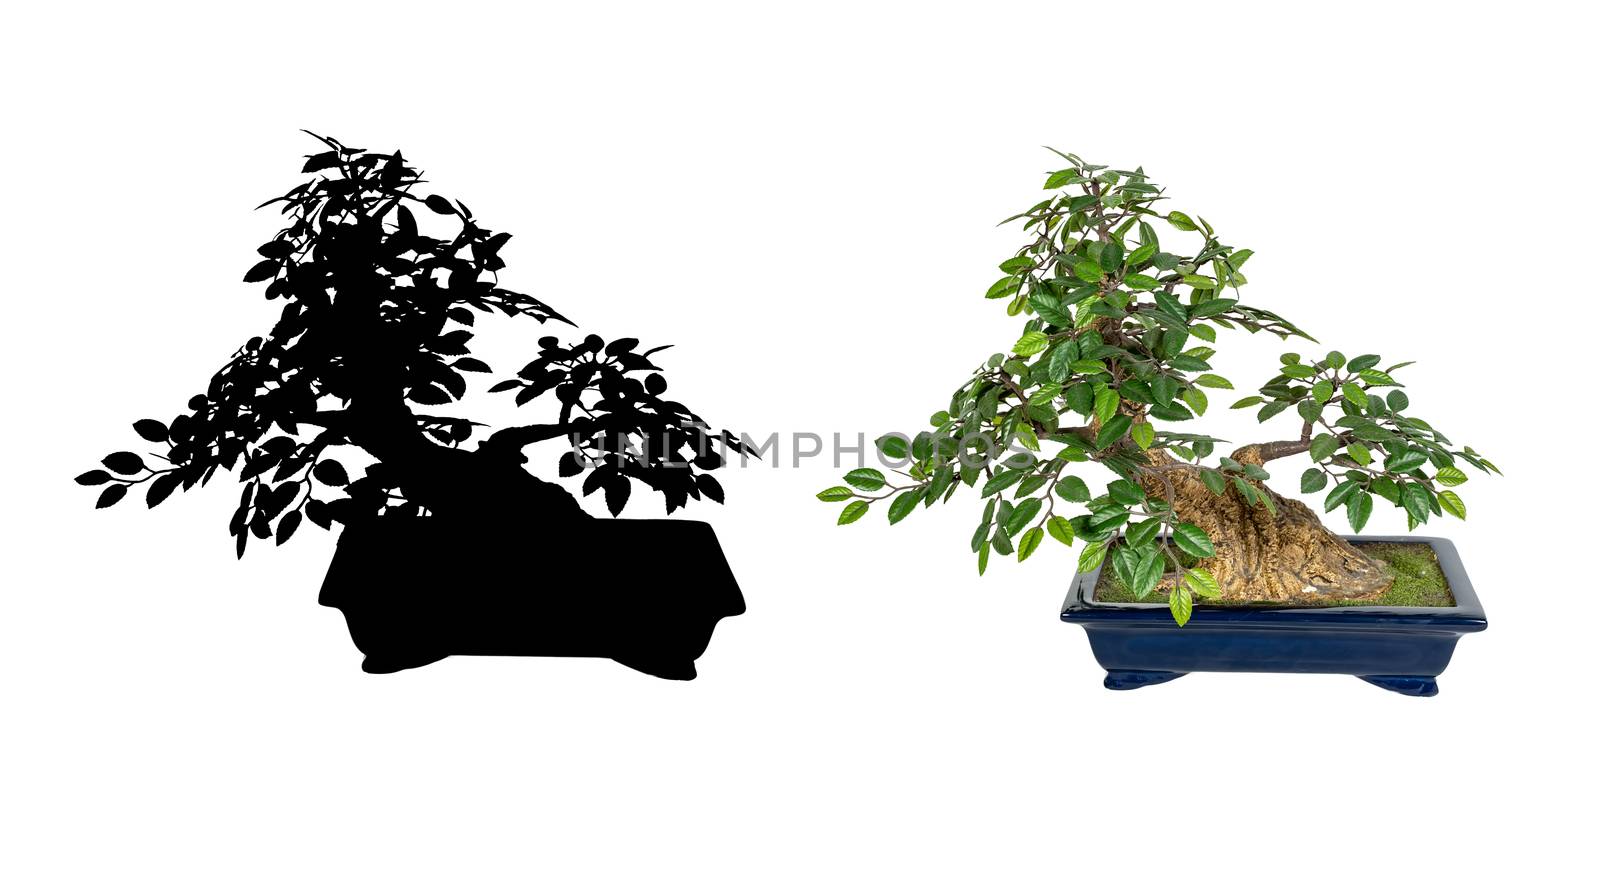 Bonsai tree isolated on a white background. The Japanese art by 977_ReX_977